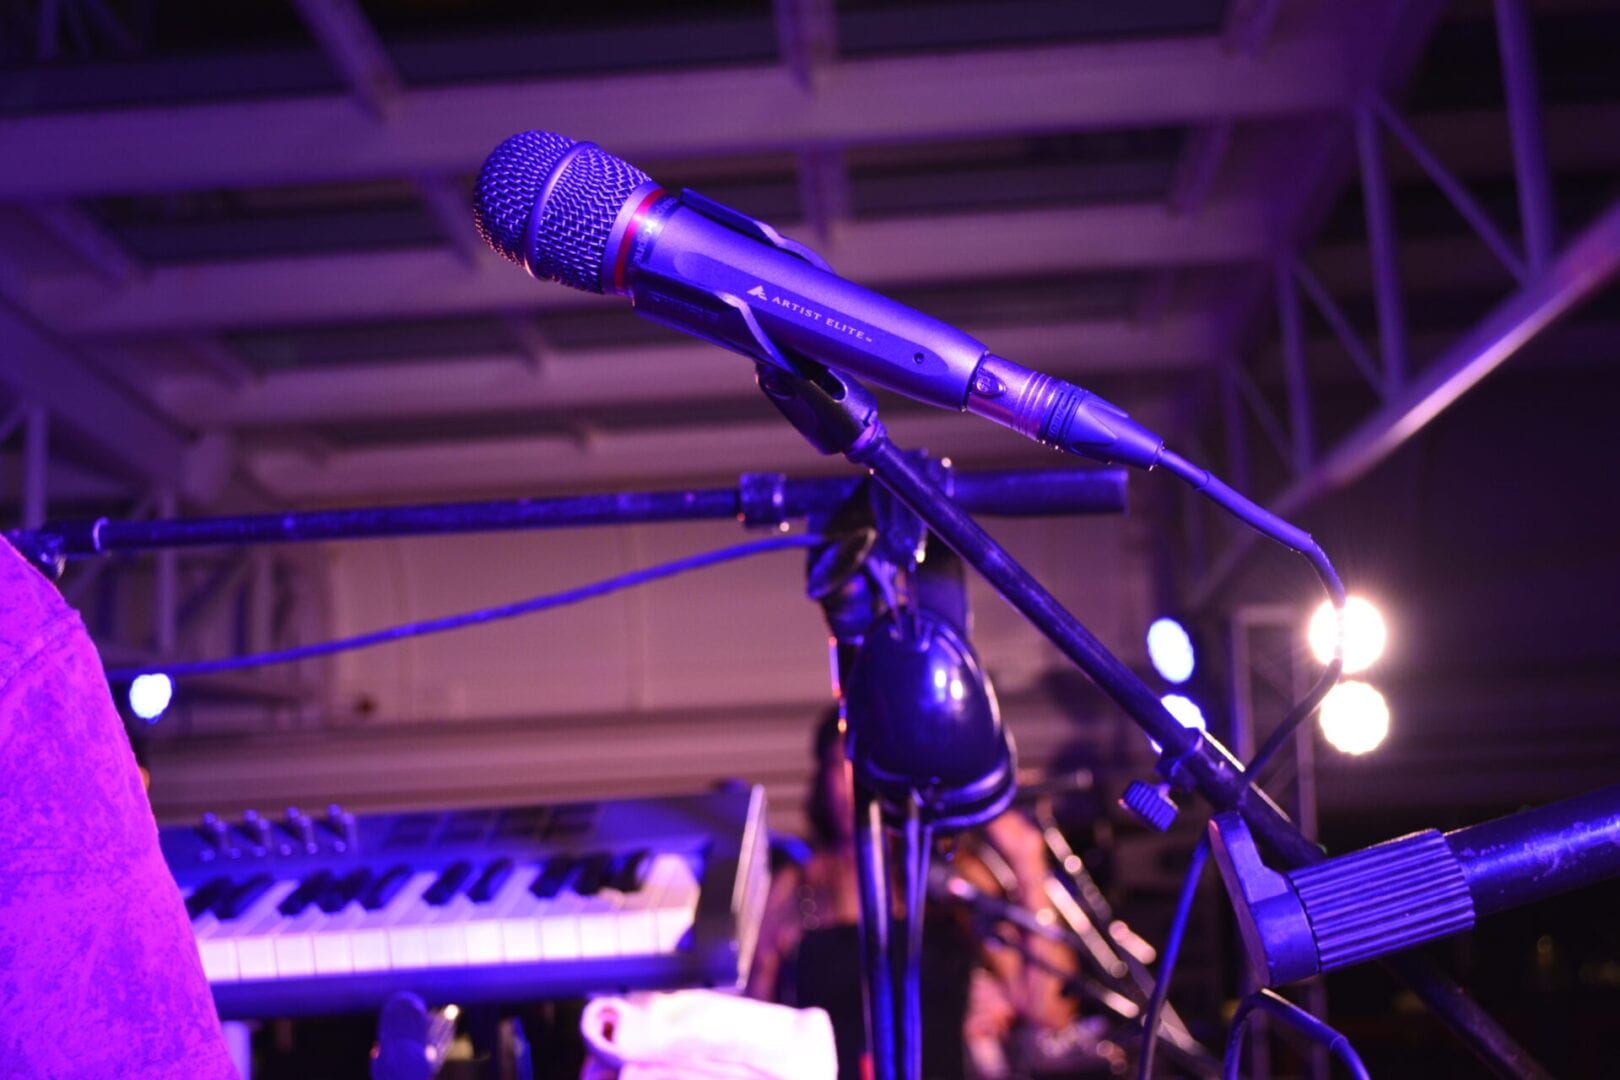 A microphone is on the stand in front of a stage.